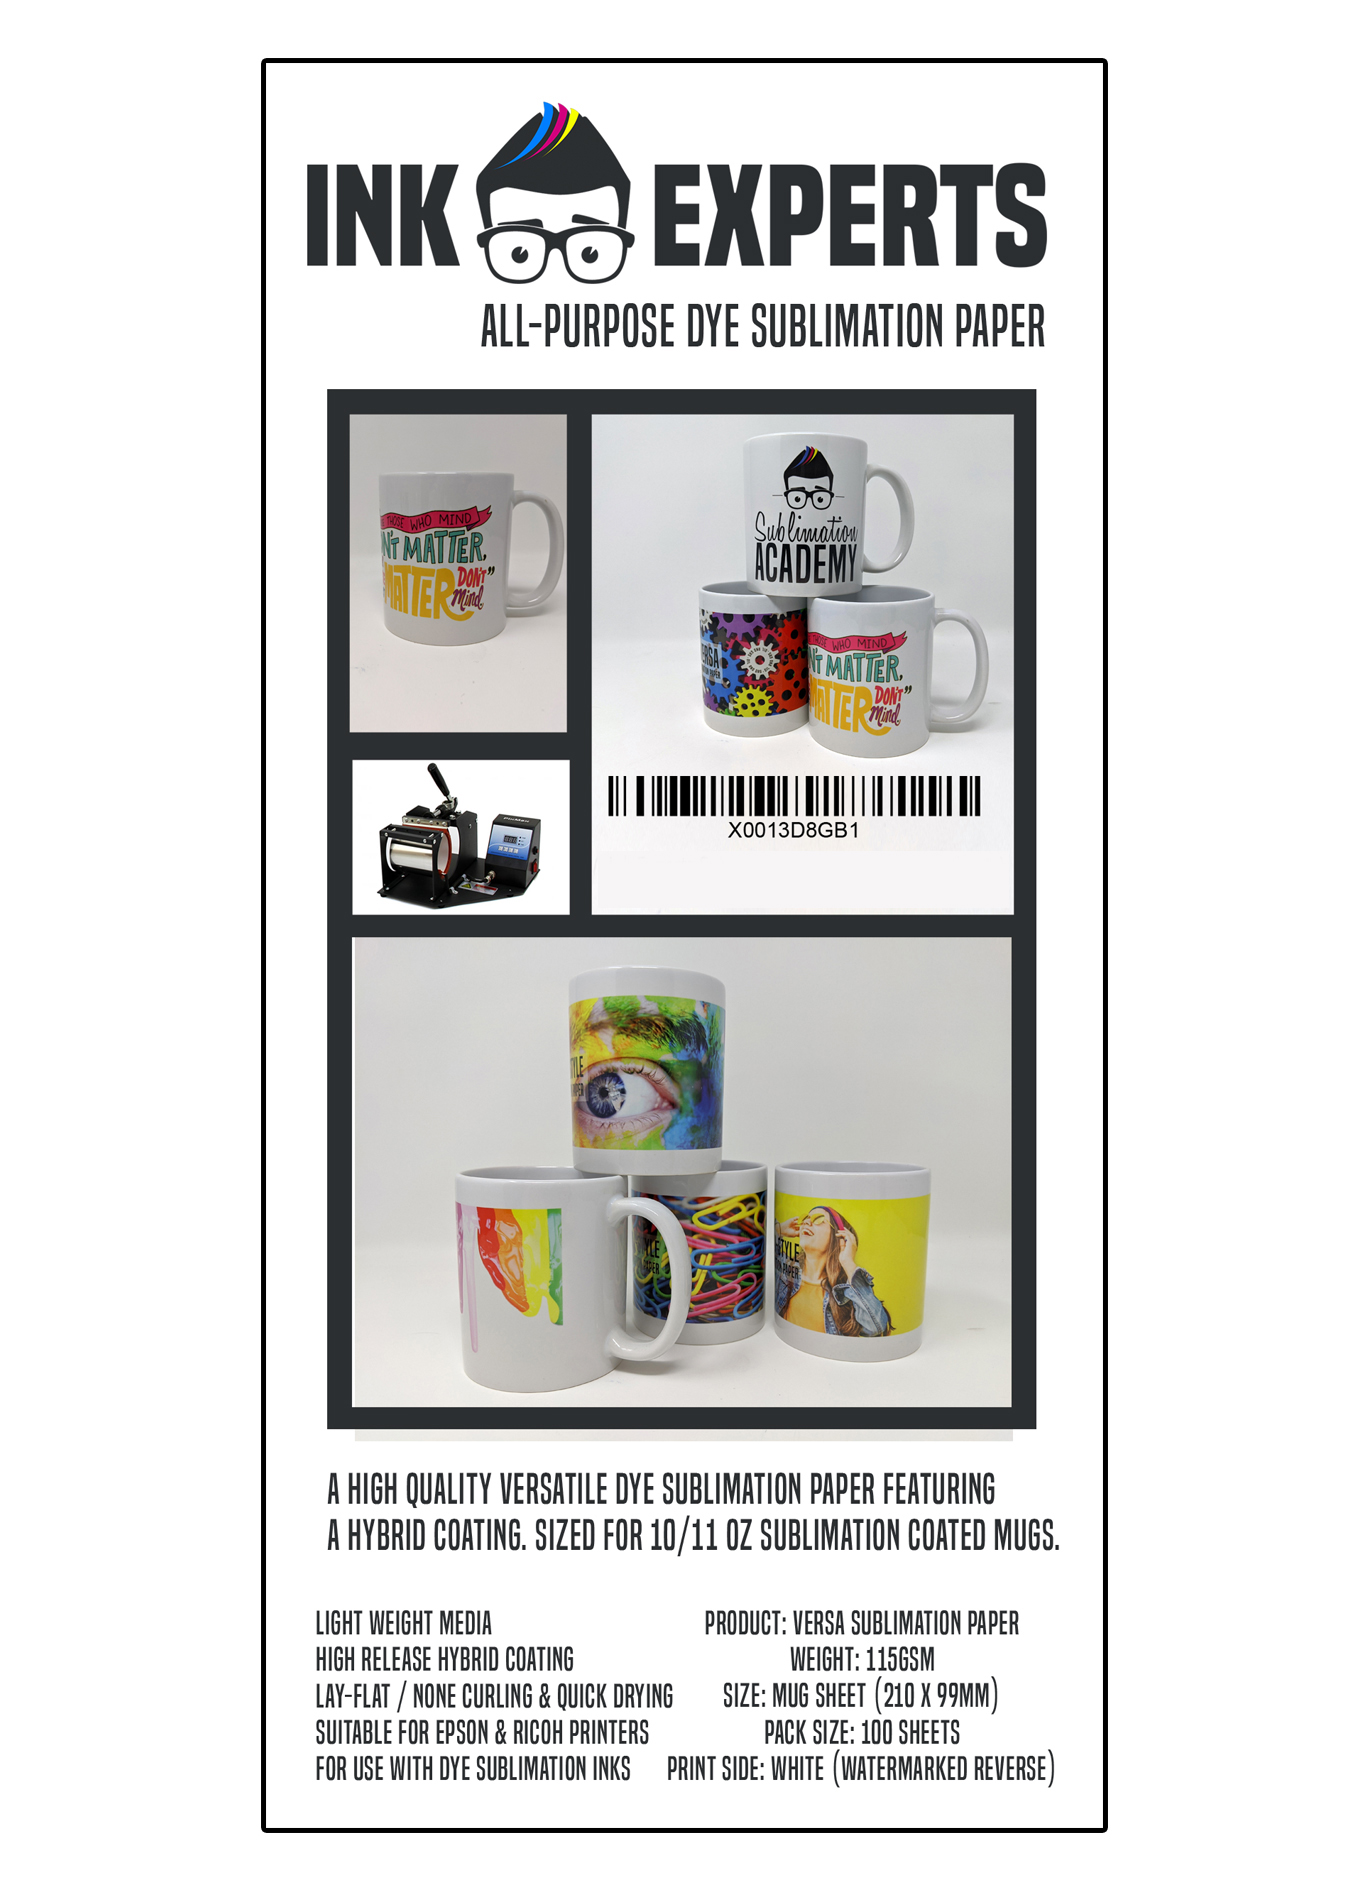 Ink Experts Subli-Versa All Purpose Mug Size Sublimation Paper 115gsm 300 Sheets 